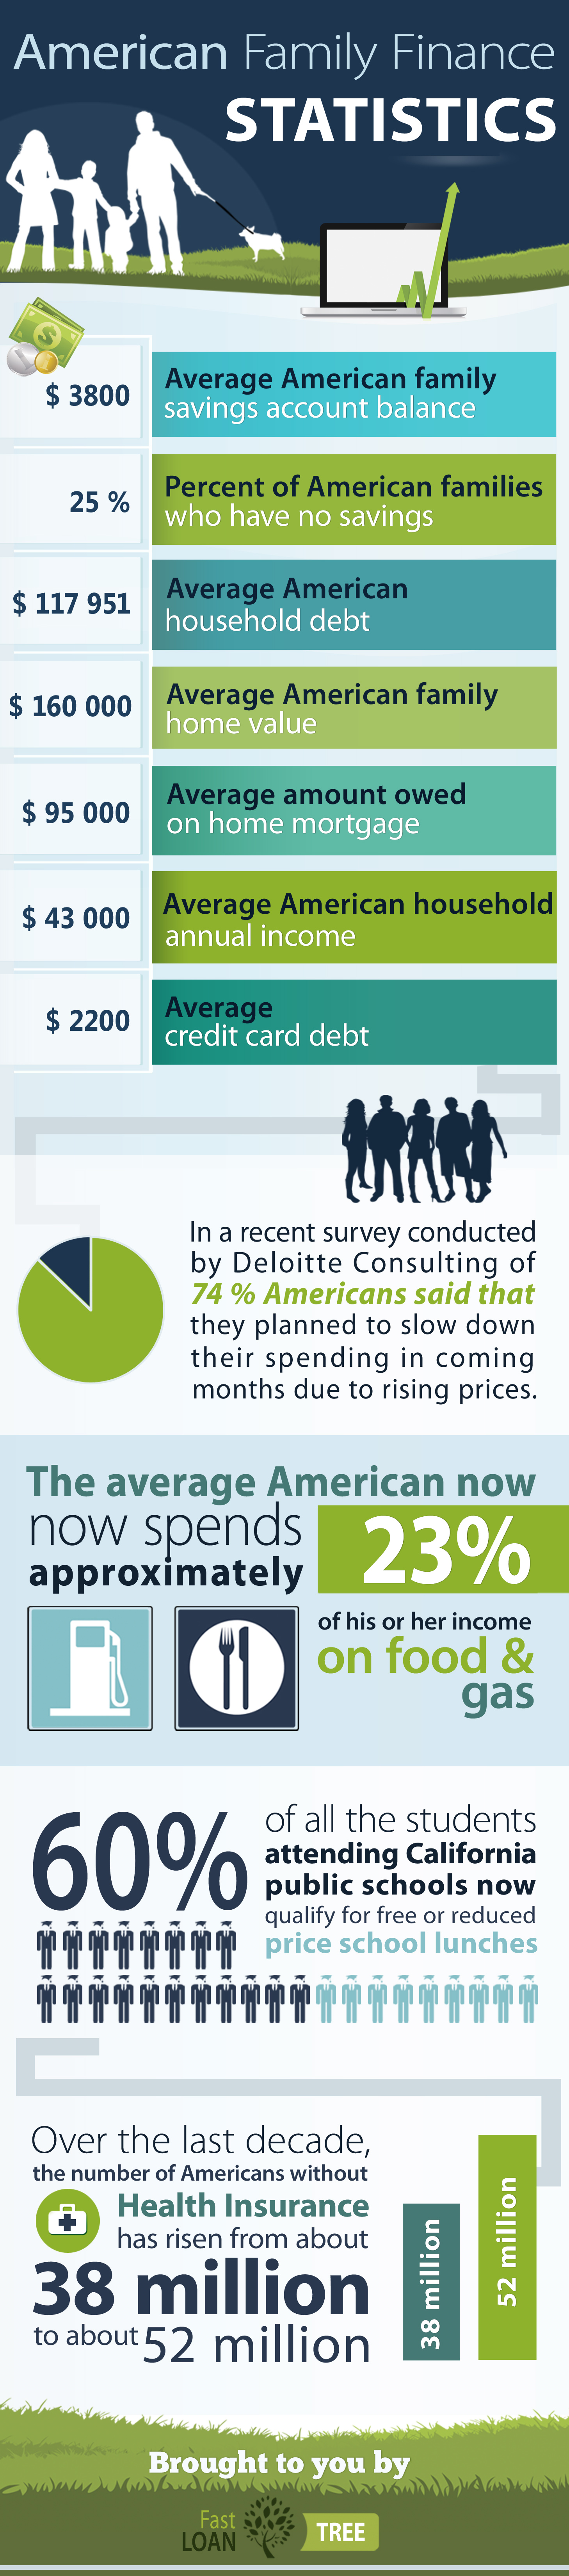 American Family Finance And Money Statistics Infographic